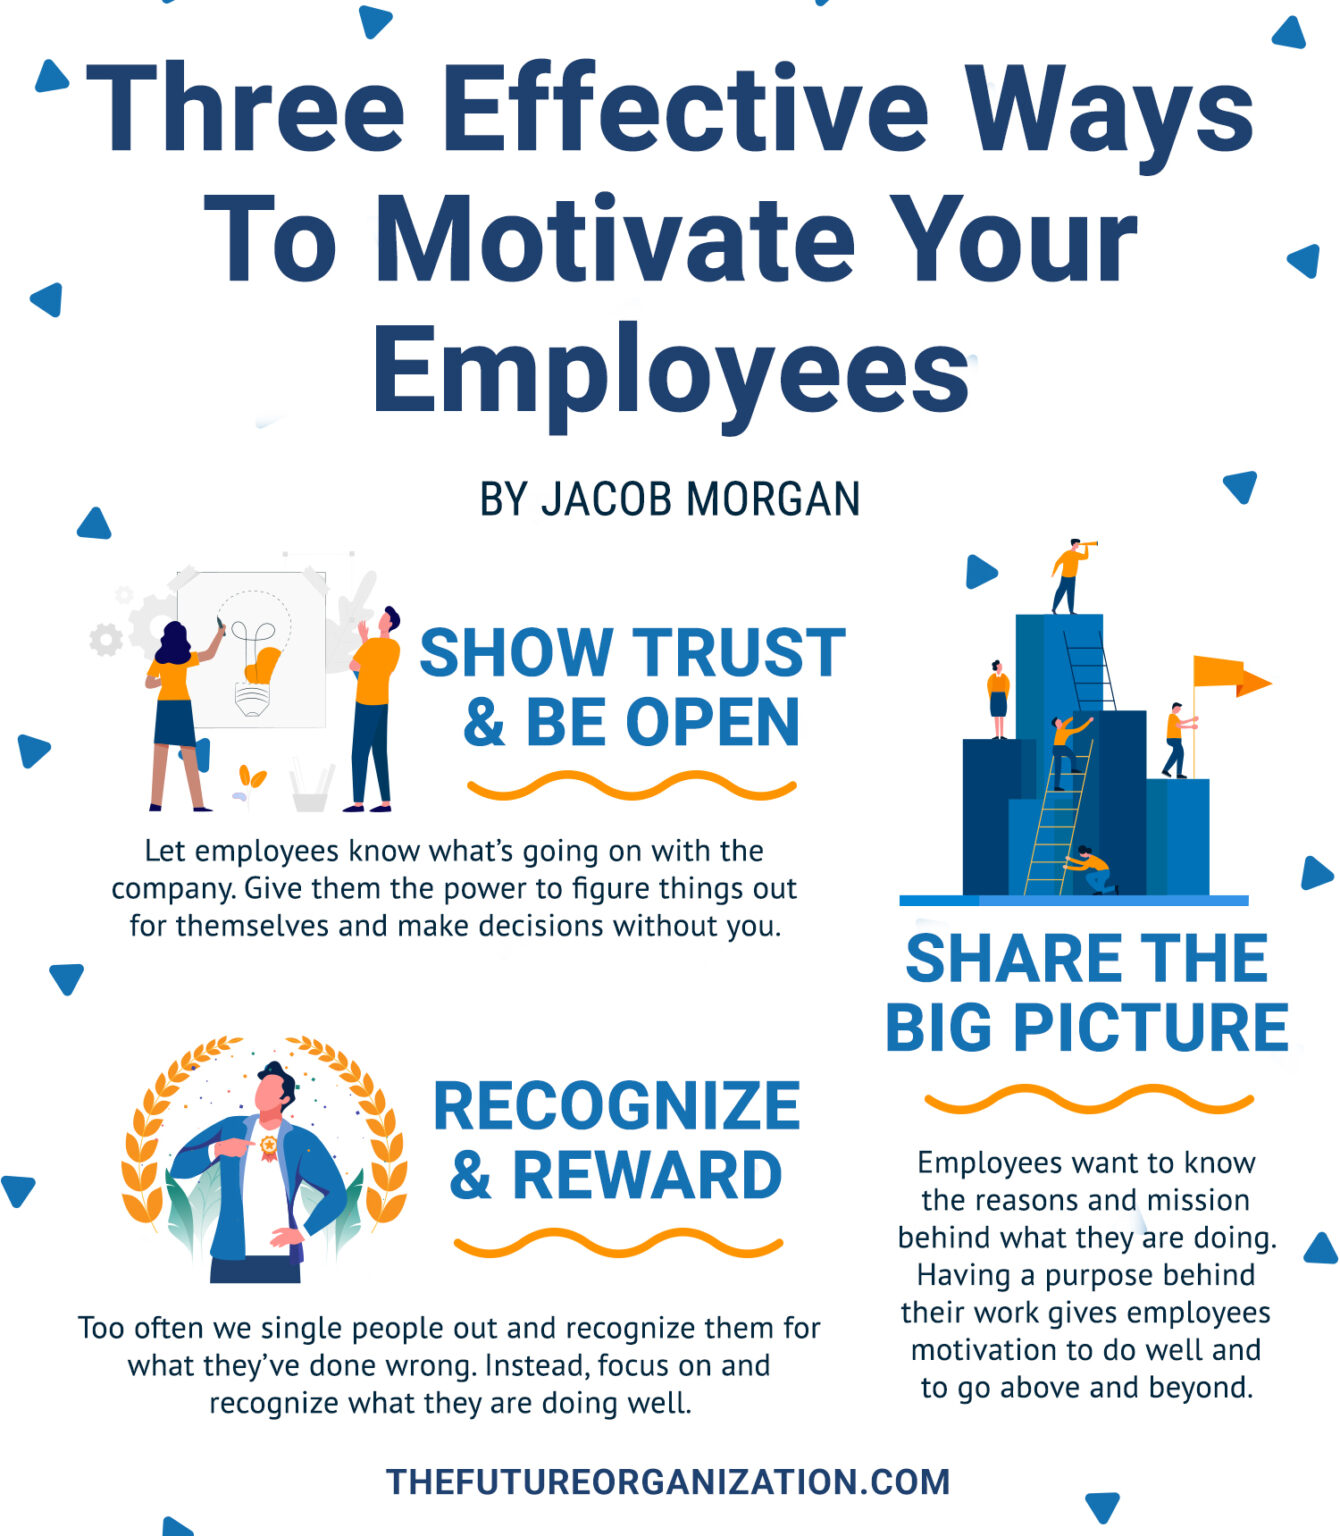 Three Effective Ways to Motivate Your Employees by Jacob Morgan